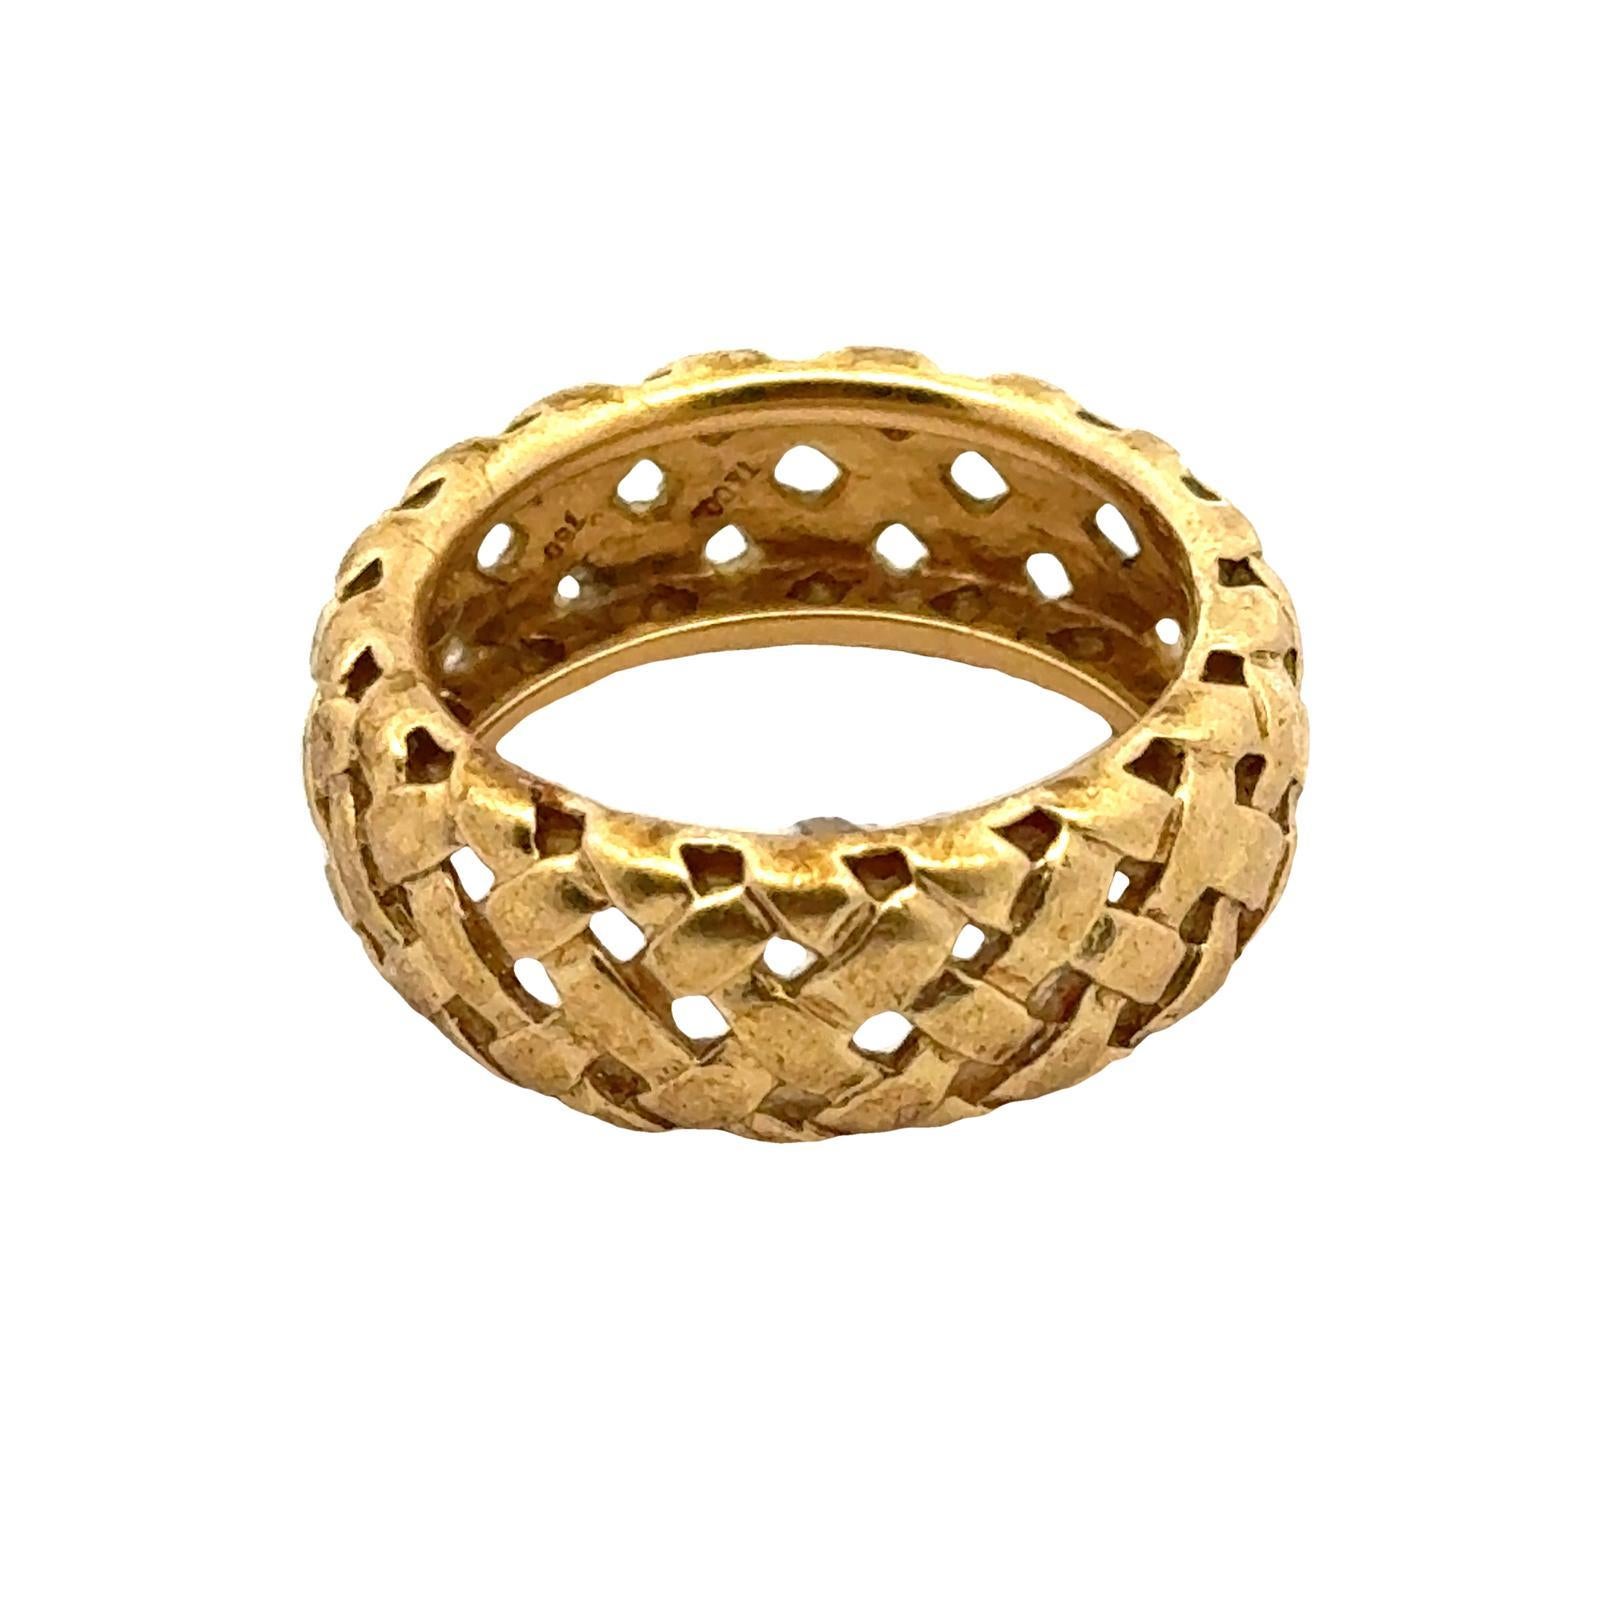 1995 Tiffany & Co. Basket Weave 18 Karat Yellow Gold Band Ring, Size 8 For Sale 1